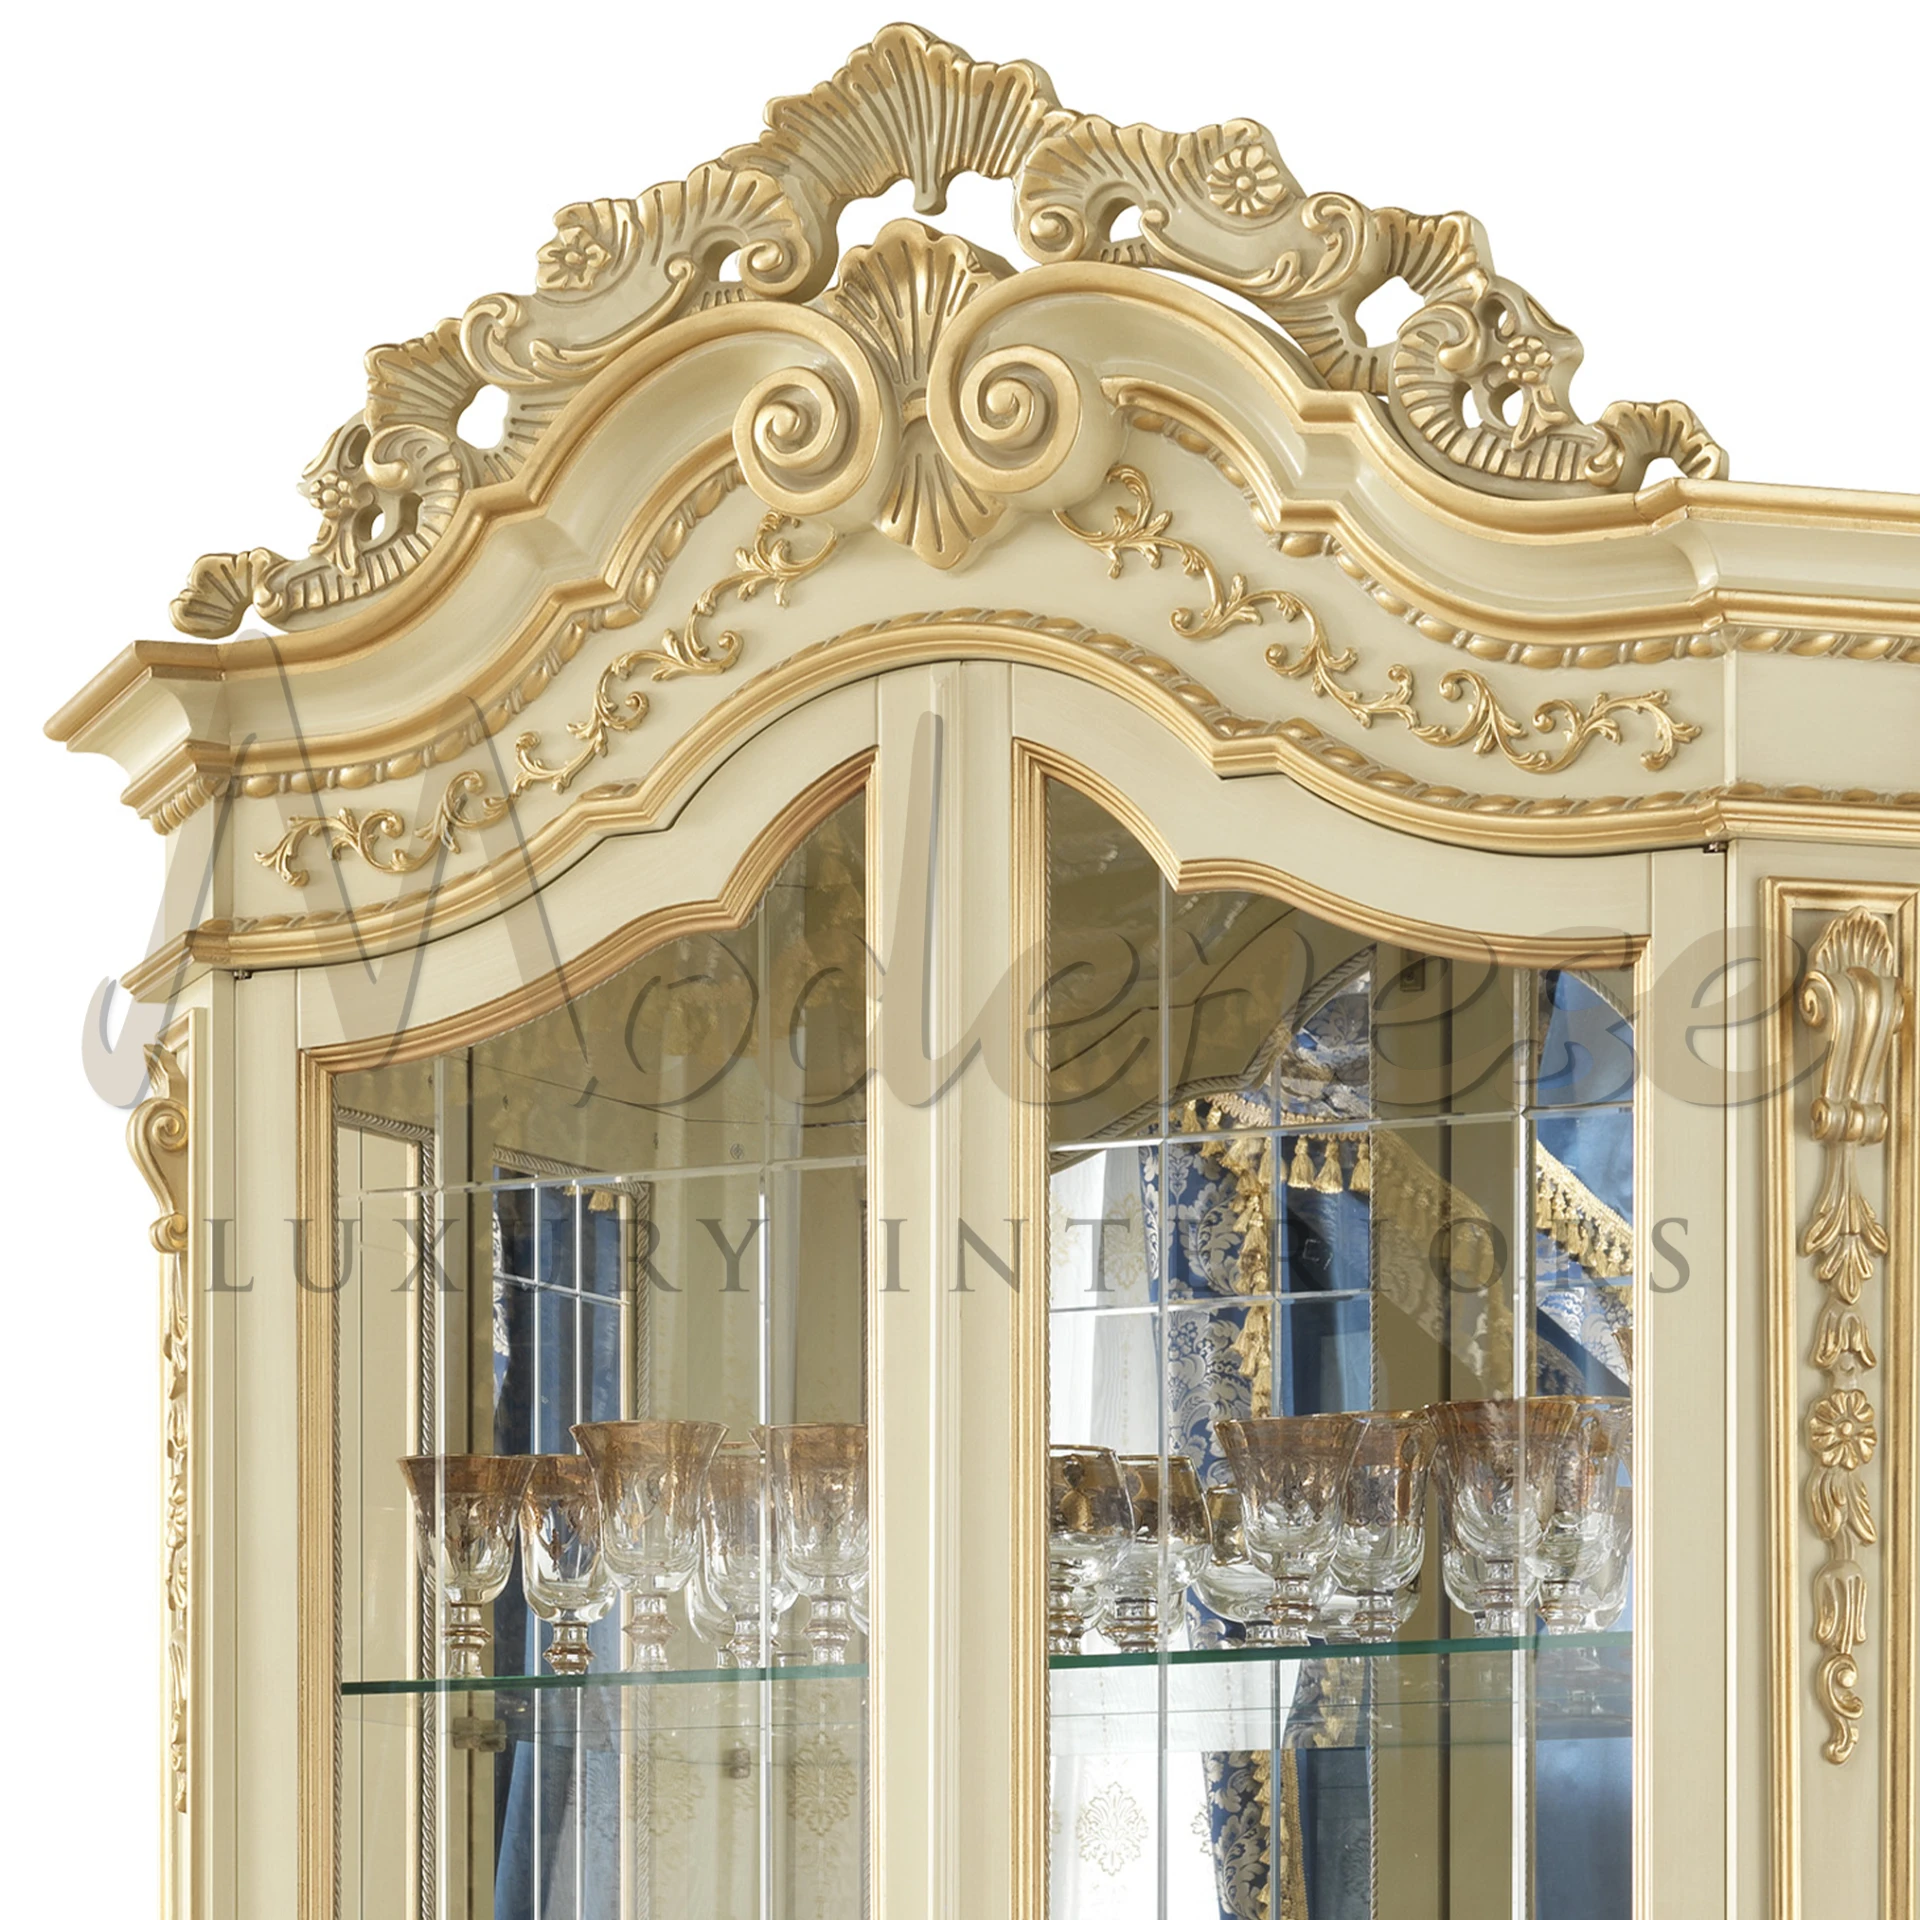 a close up view of the luxury ivory cabinet top showing fancy design with golden details